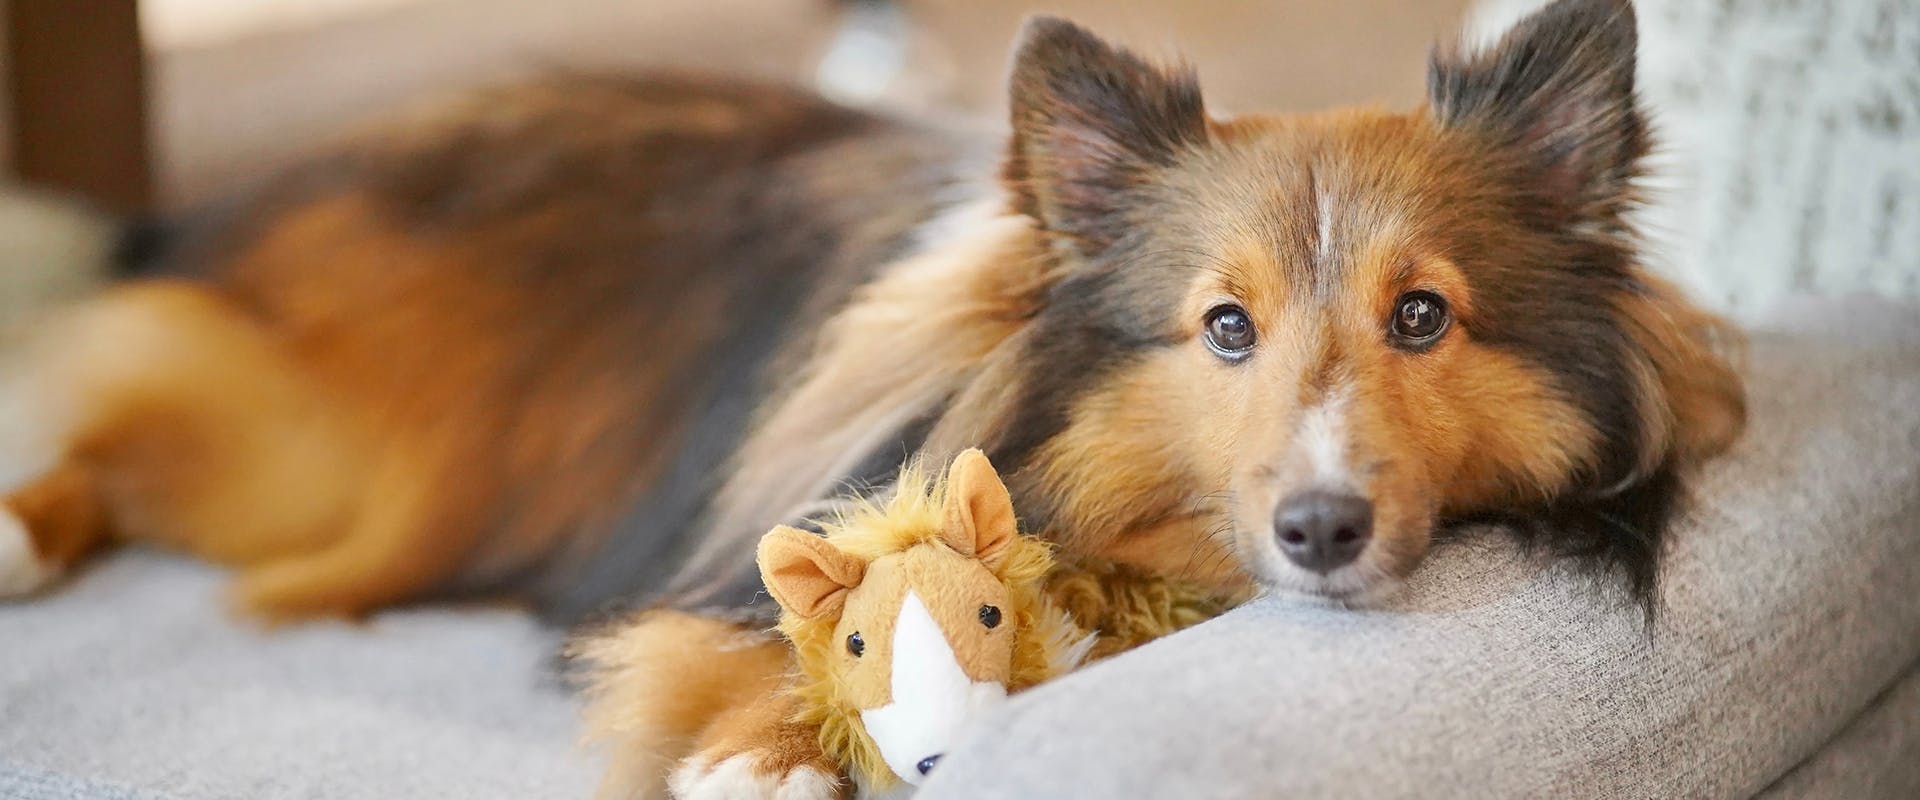 A Shetland Sheepdog laying in a dog bed, a cuddly toy at its side